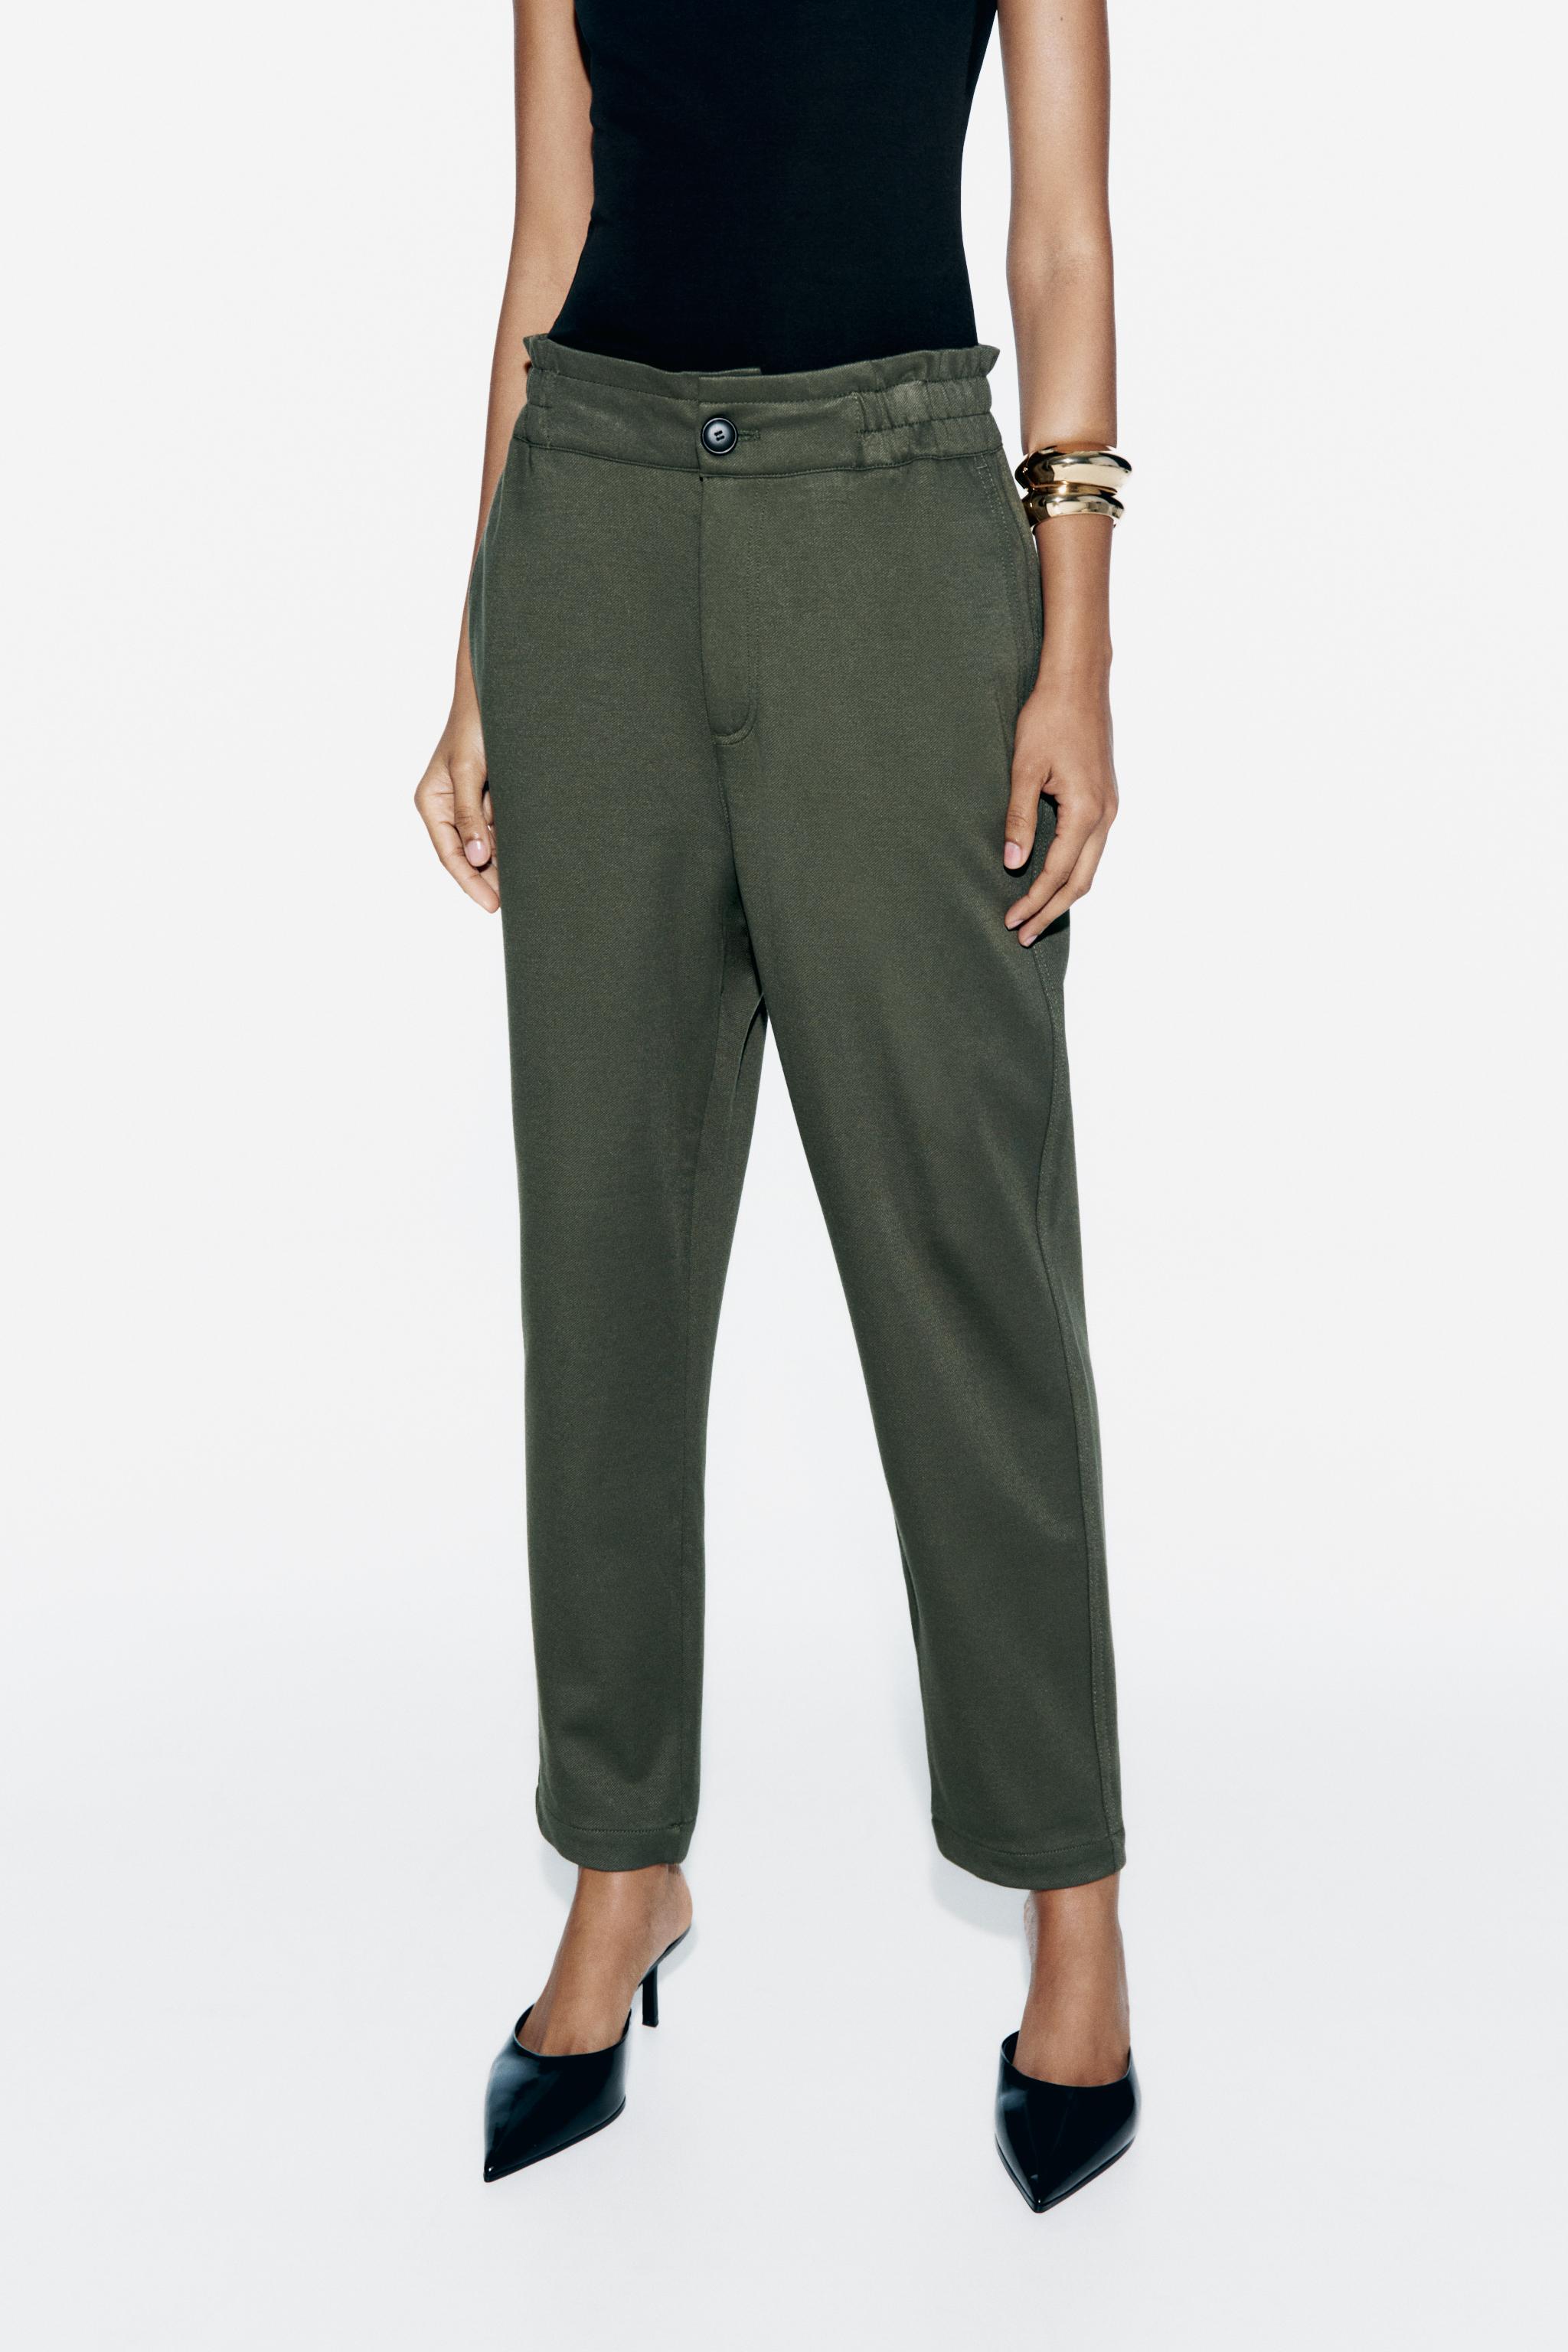 Women's Ankle Length Paper Bag Trousers - Who What Wear - Green Size 8